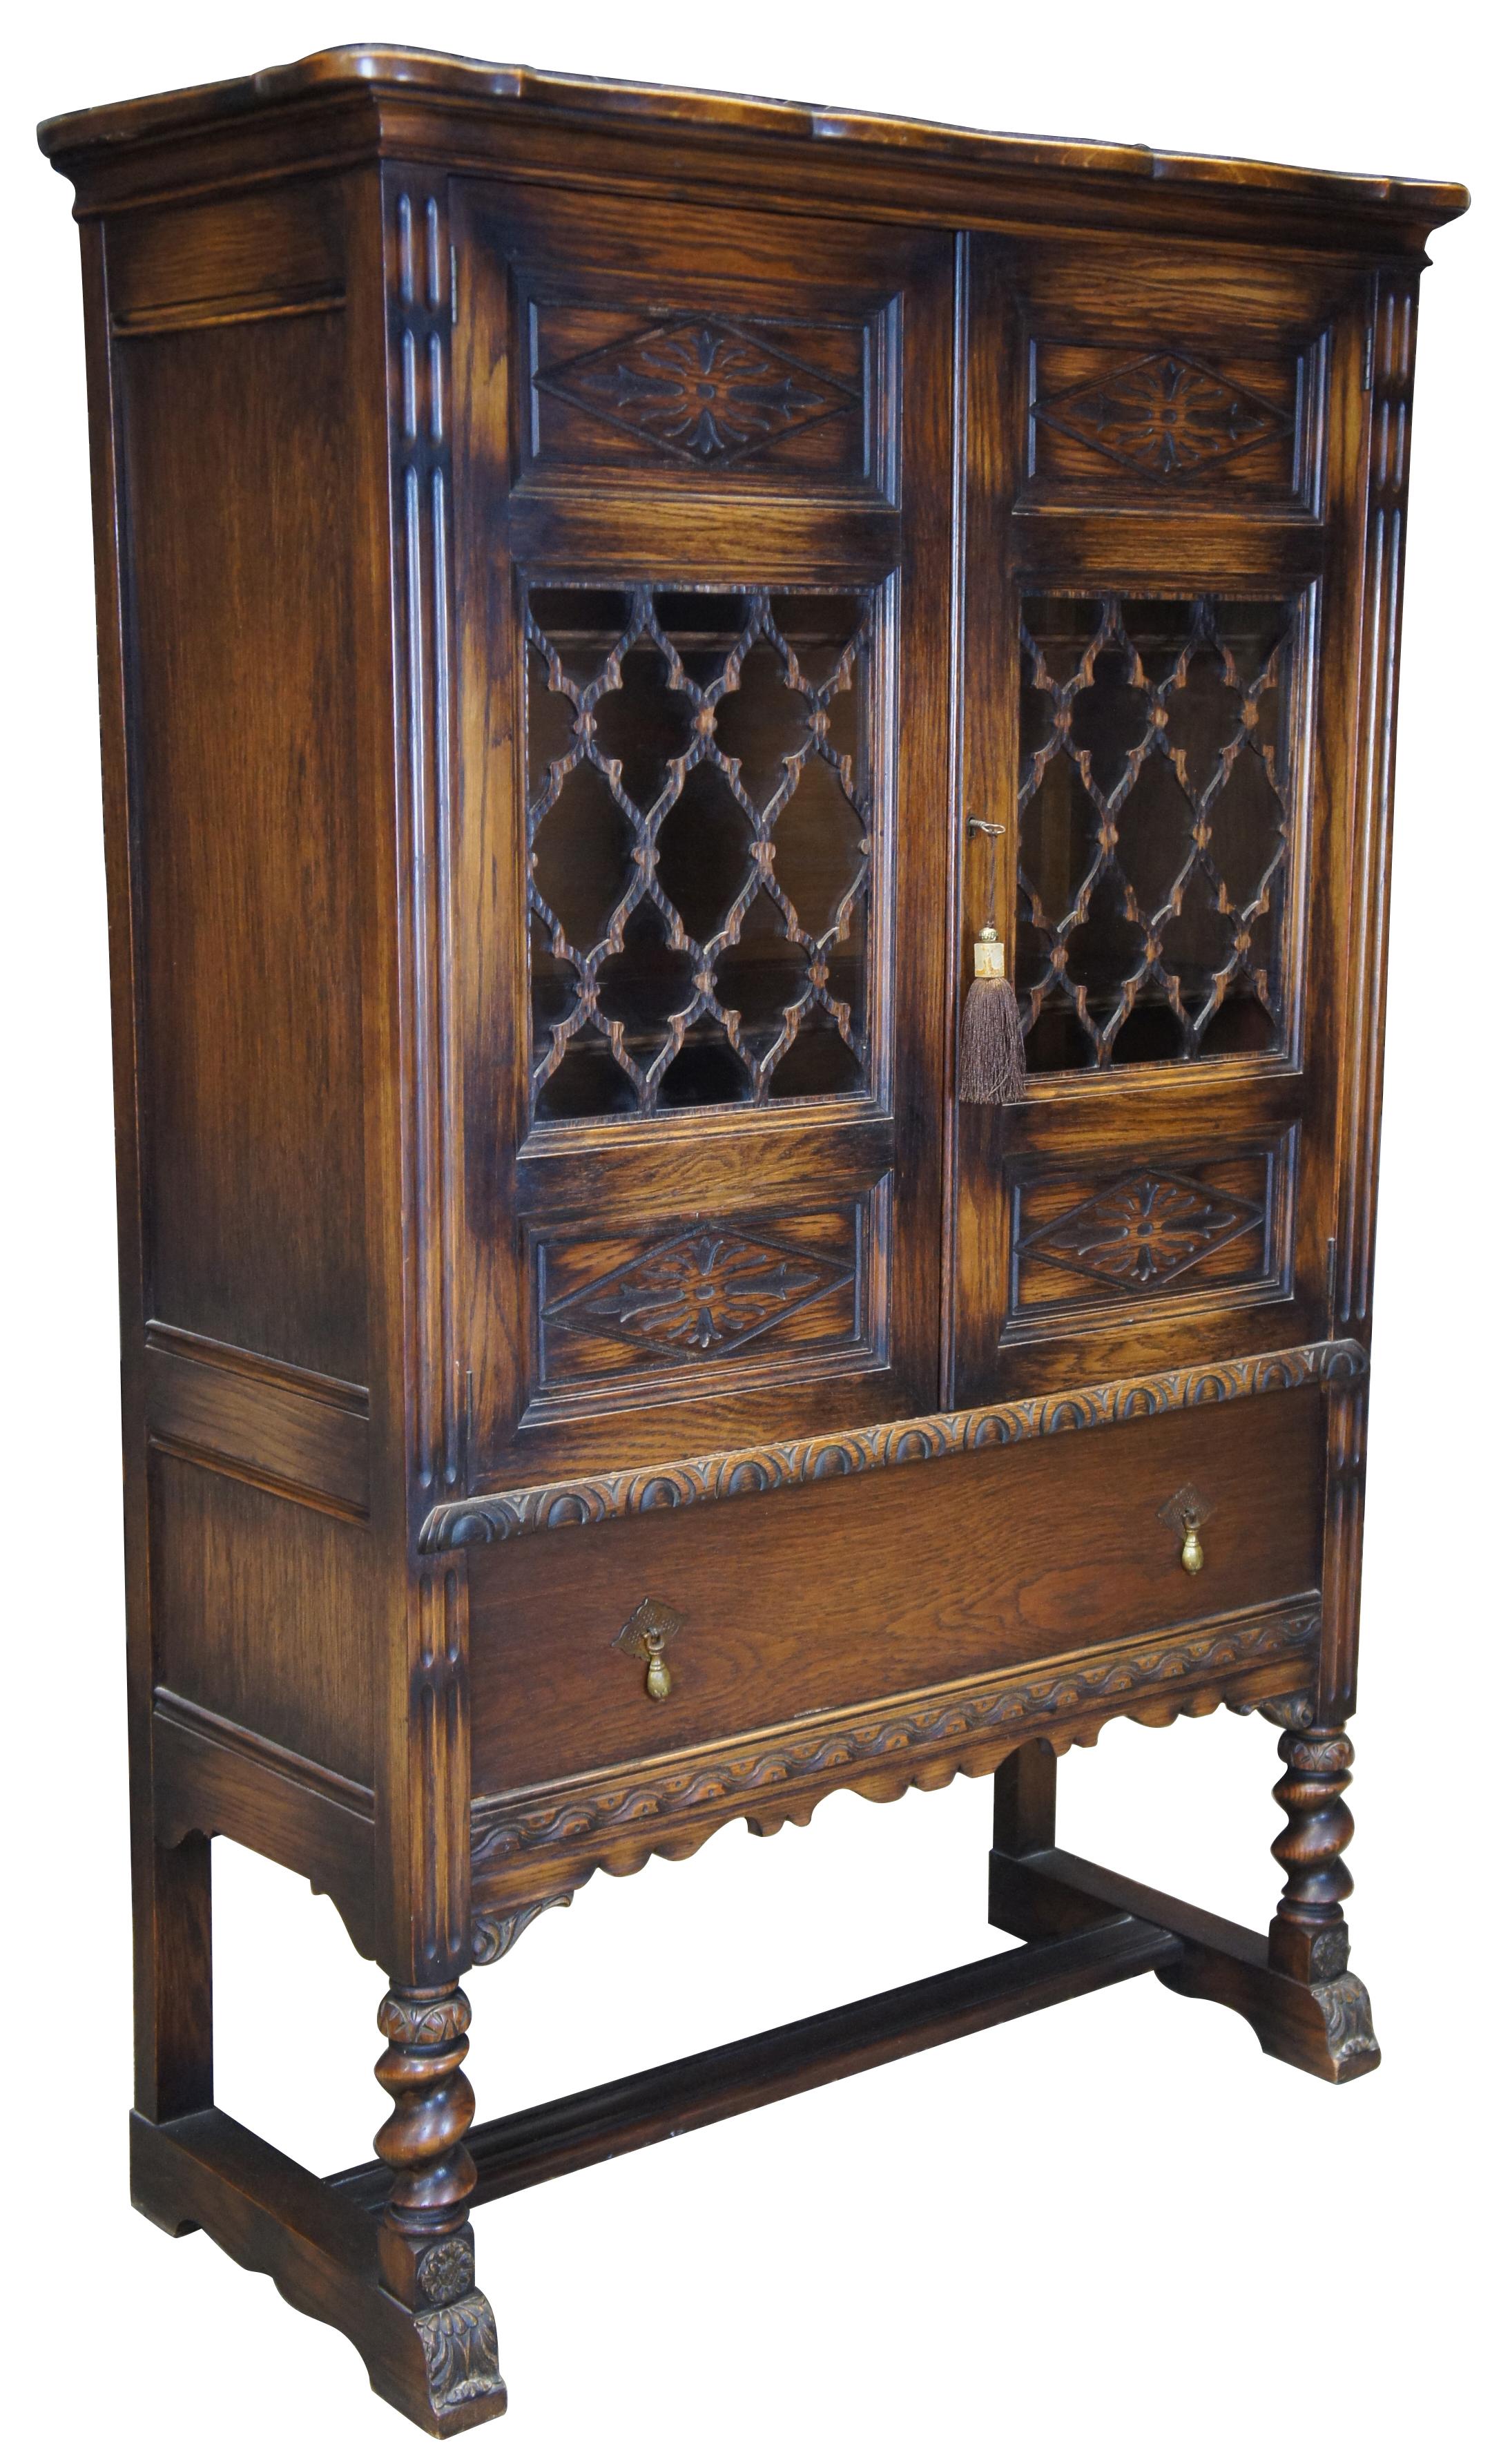 Early 20th century Jacobean or Spanish Revival china cabinet. Made from oak with two diamond paneled doors featuring lattice fretwork over glass doors. Doors open to three shelves with plate grooves. The cabinet features one large lower drawer for